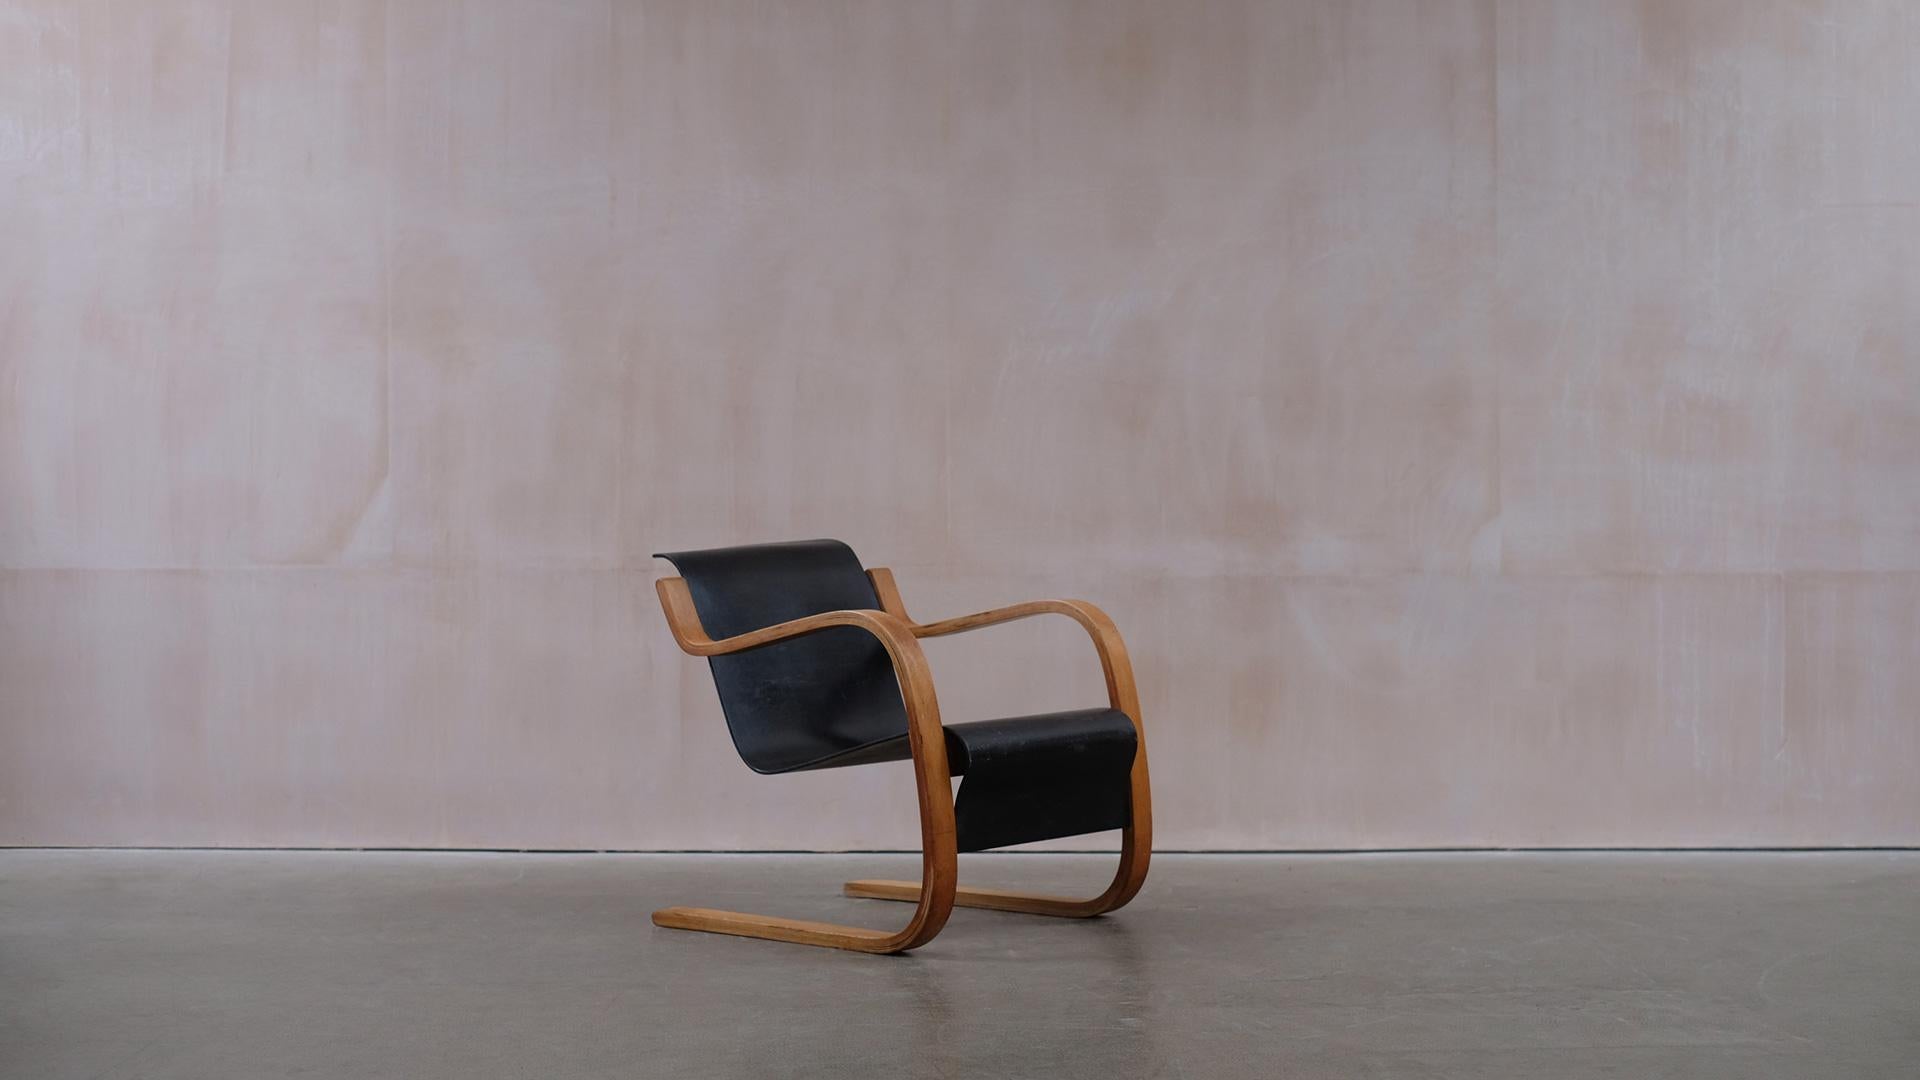 Model 31 chair designed by Alvar Aalto for O.y. Huonekalu – Ja Rakennustyotehdas AB, Finland. This example produced in the 1930’s. Early Finmar distribution label intact together with 'Made in Finland' paper label and Bowman Brothers of Camden